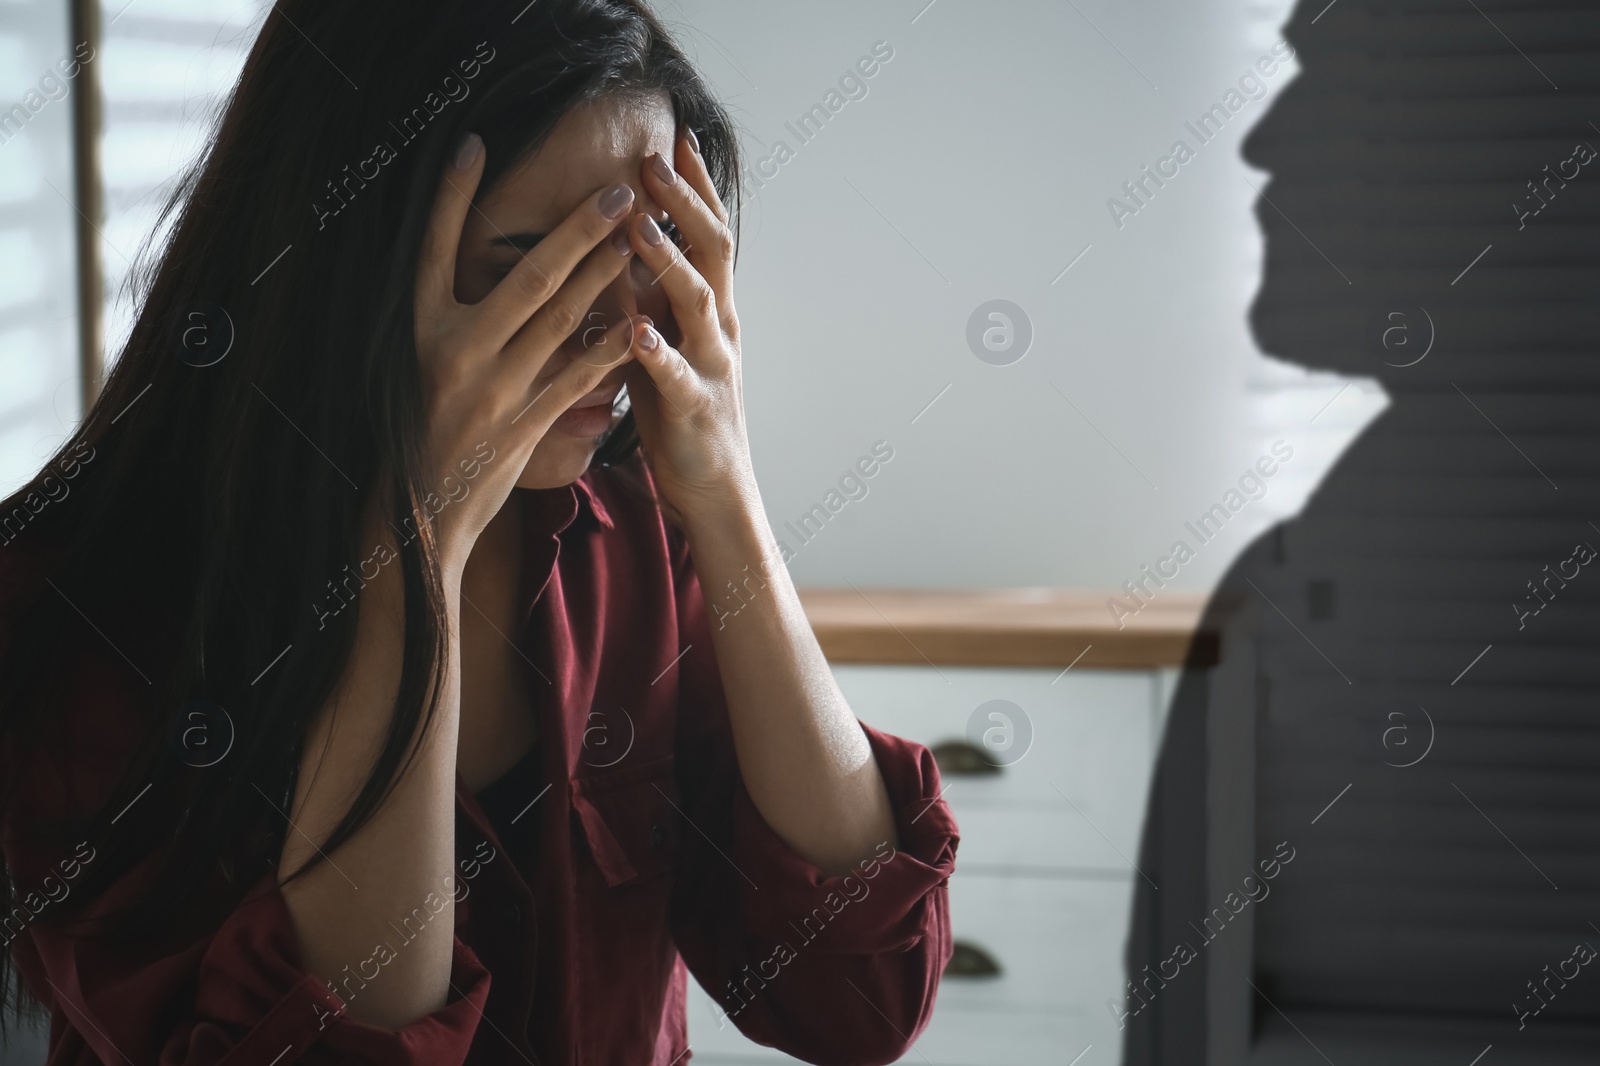 Image of Suffering from hallucination. Scared woman having panic attack because of man's shadow